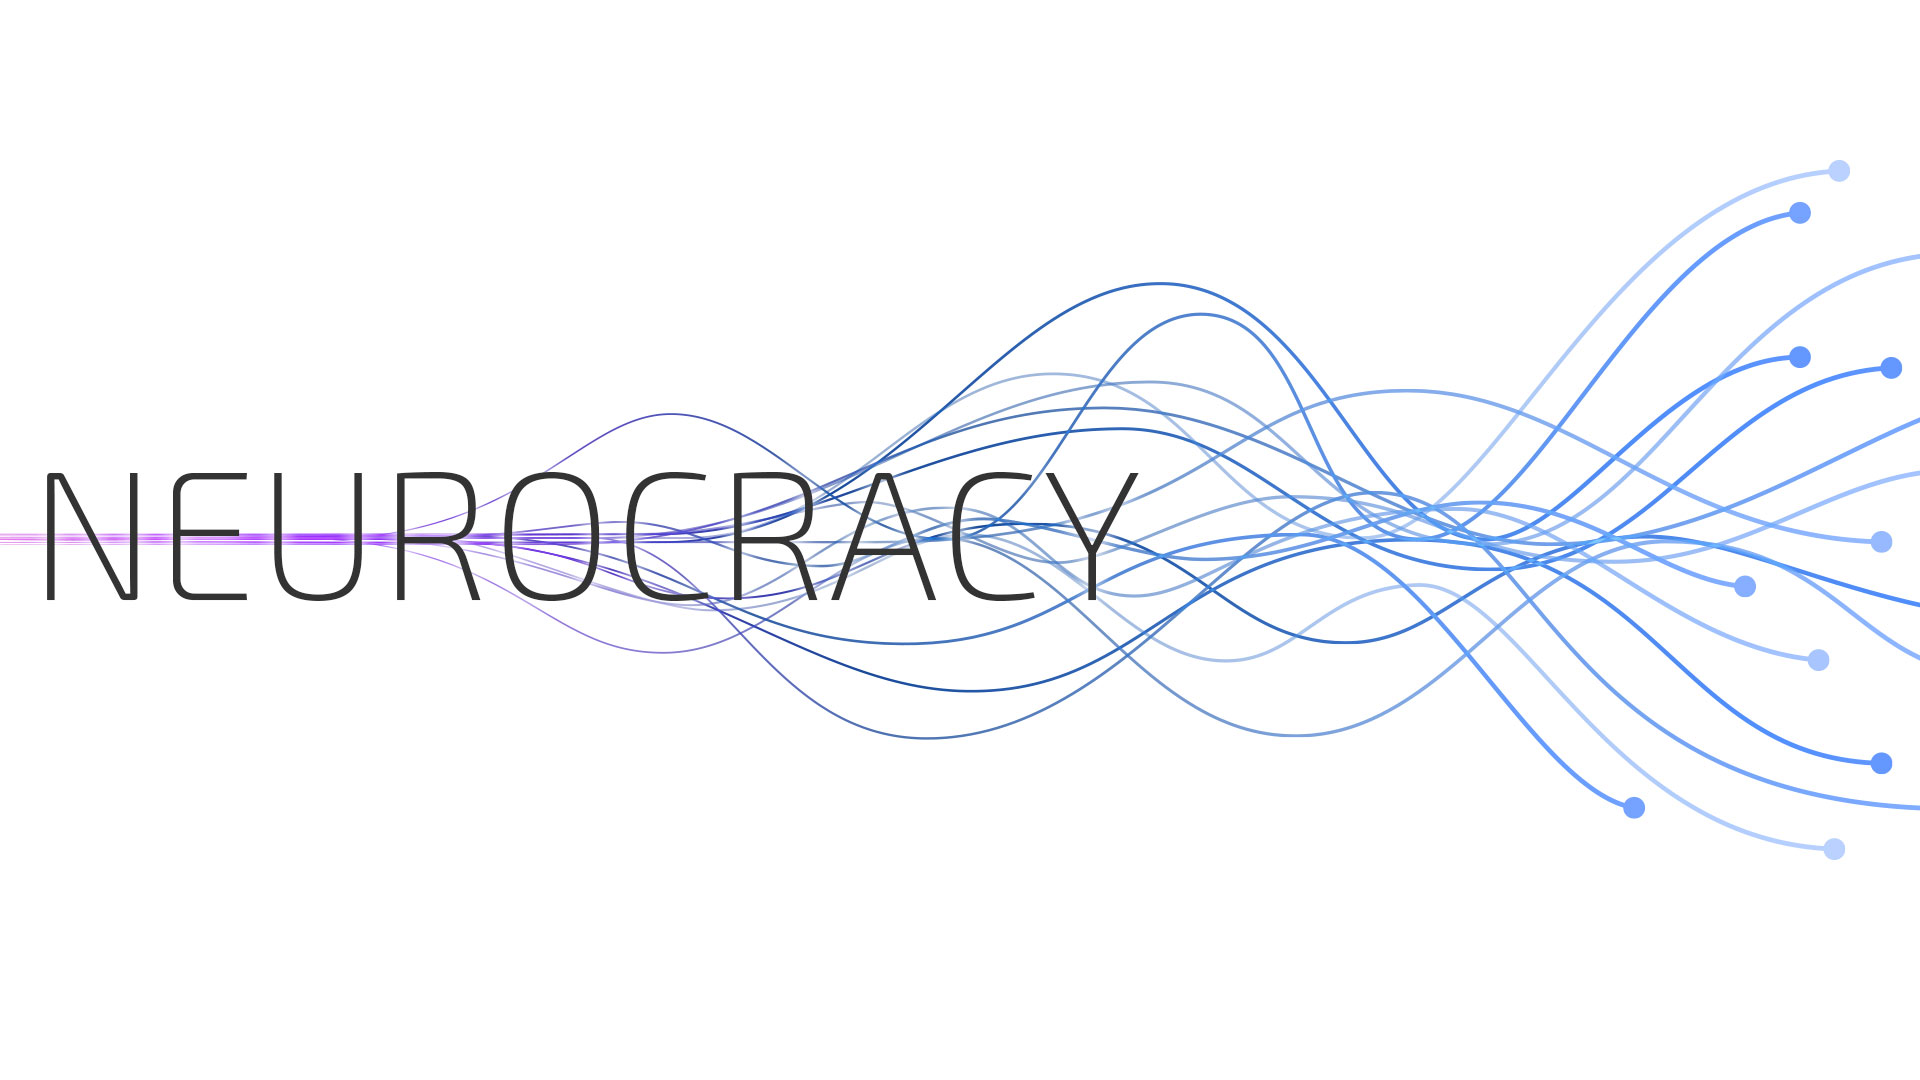 A stylized "Neurocracy" against a dark background with several diverging strands splitting off of a central, horizontal strand.